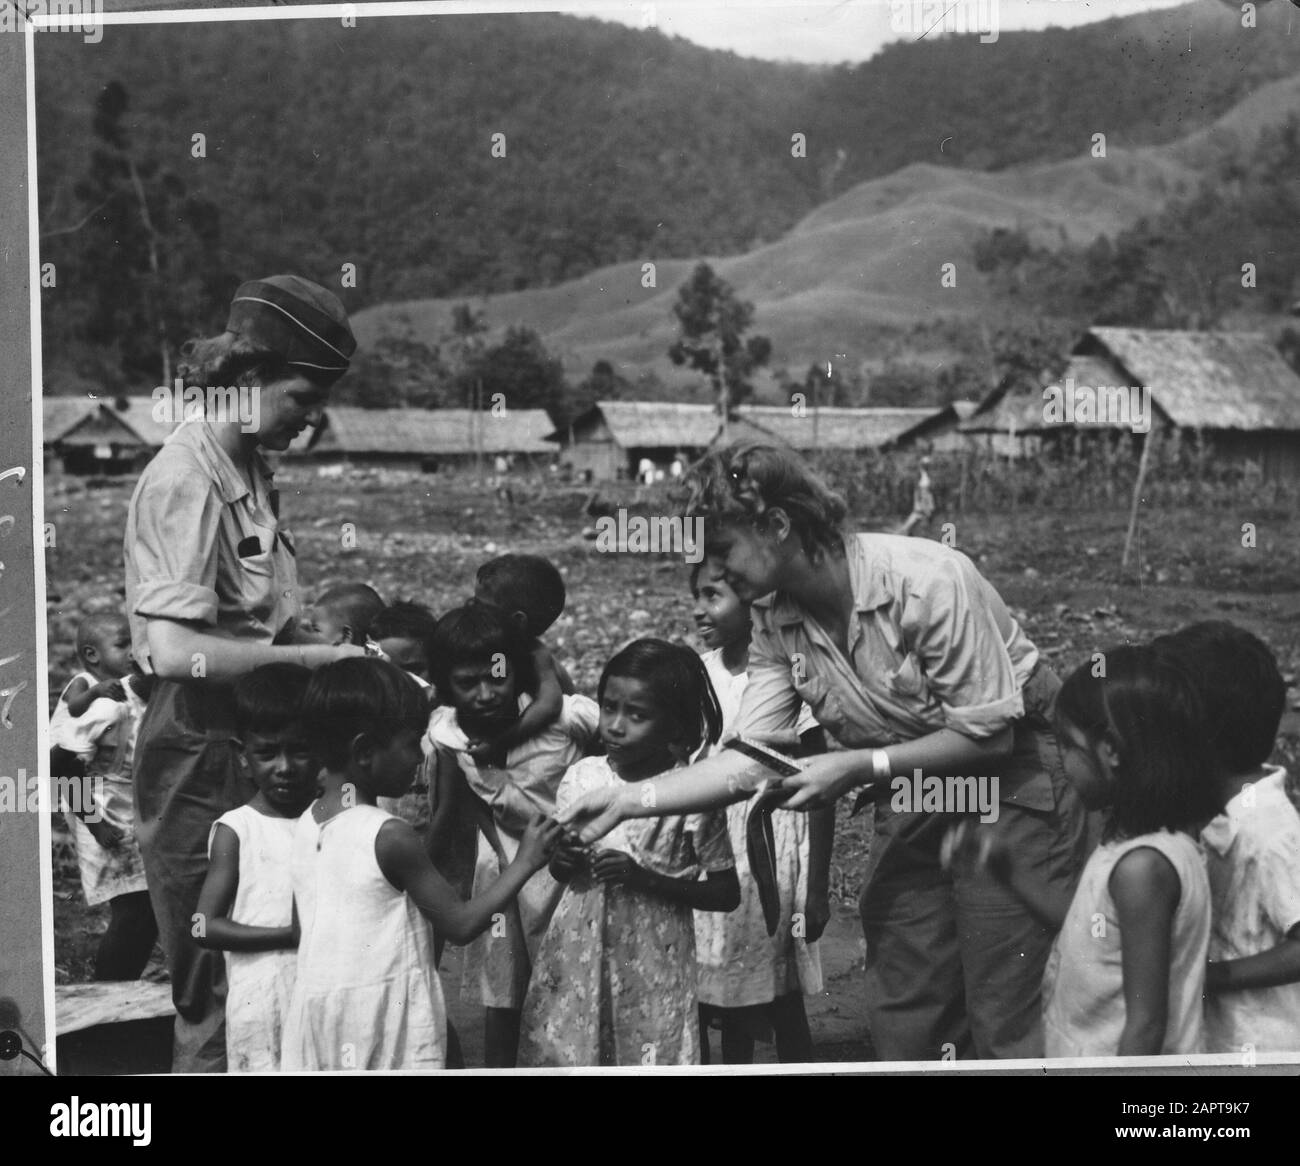 Female NICA officials hand out something to children Annotation: Repronegative Date: 1940-1945 Location: Indonesia, Dutch East Indies Keywords: children, military, Second World War, women Stock Photo